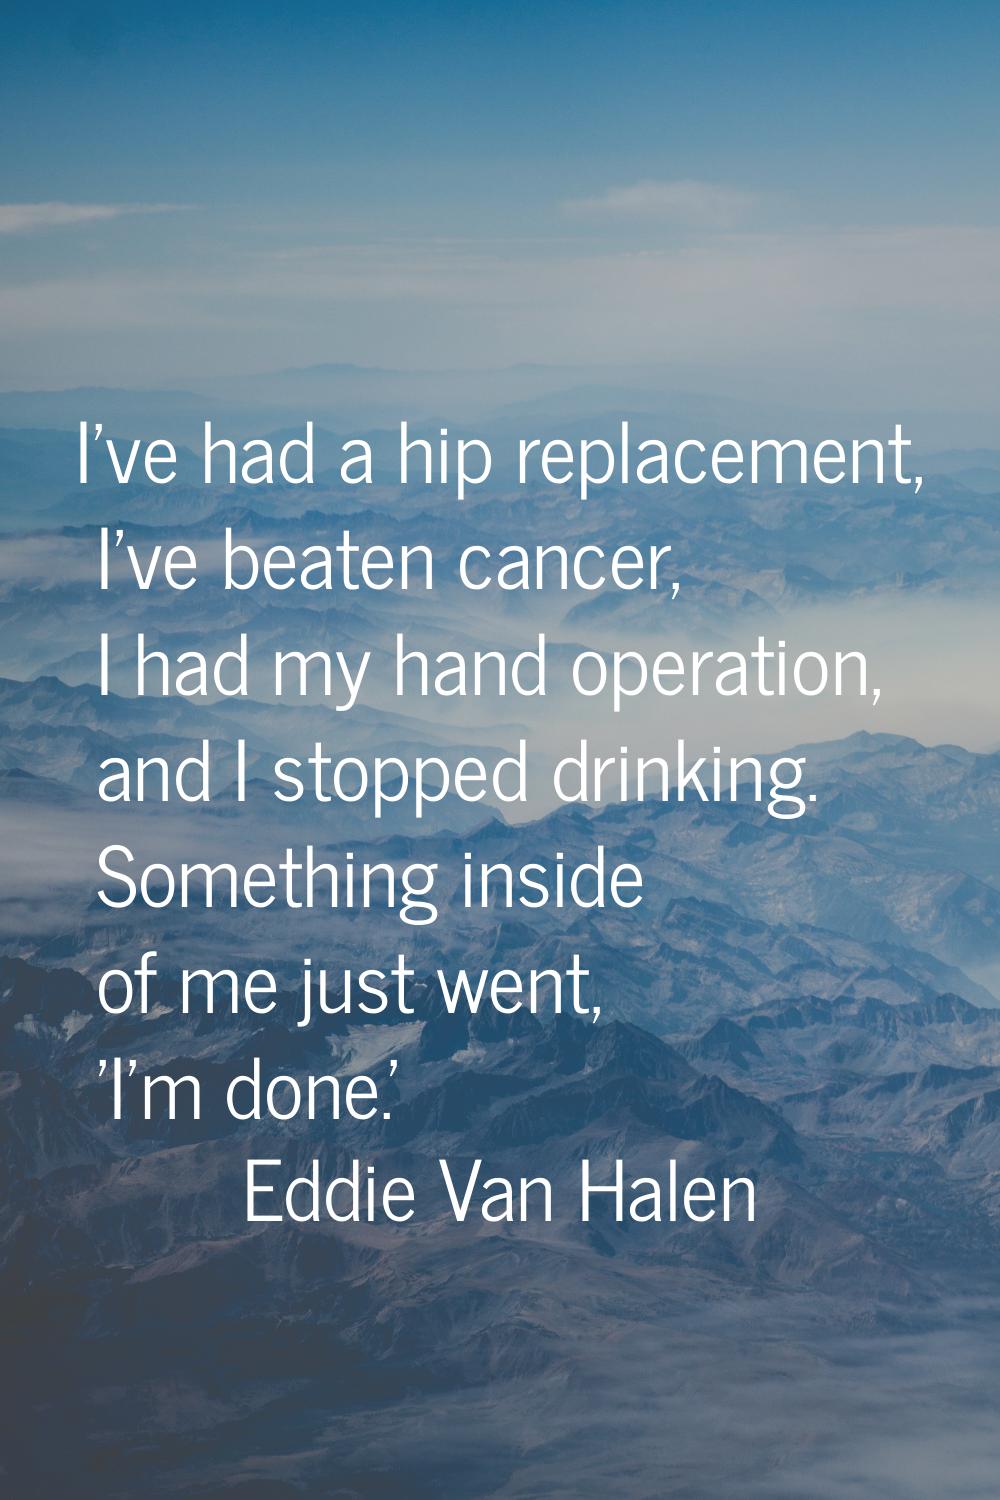 I've had a hip replacement, I've beaten cancer, I had my hand operation, and I stopped drinking. So